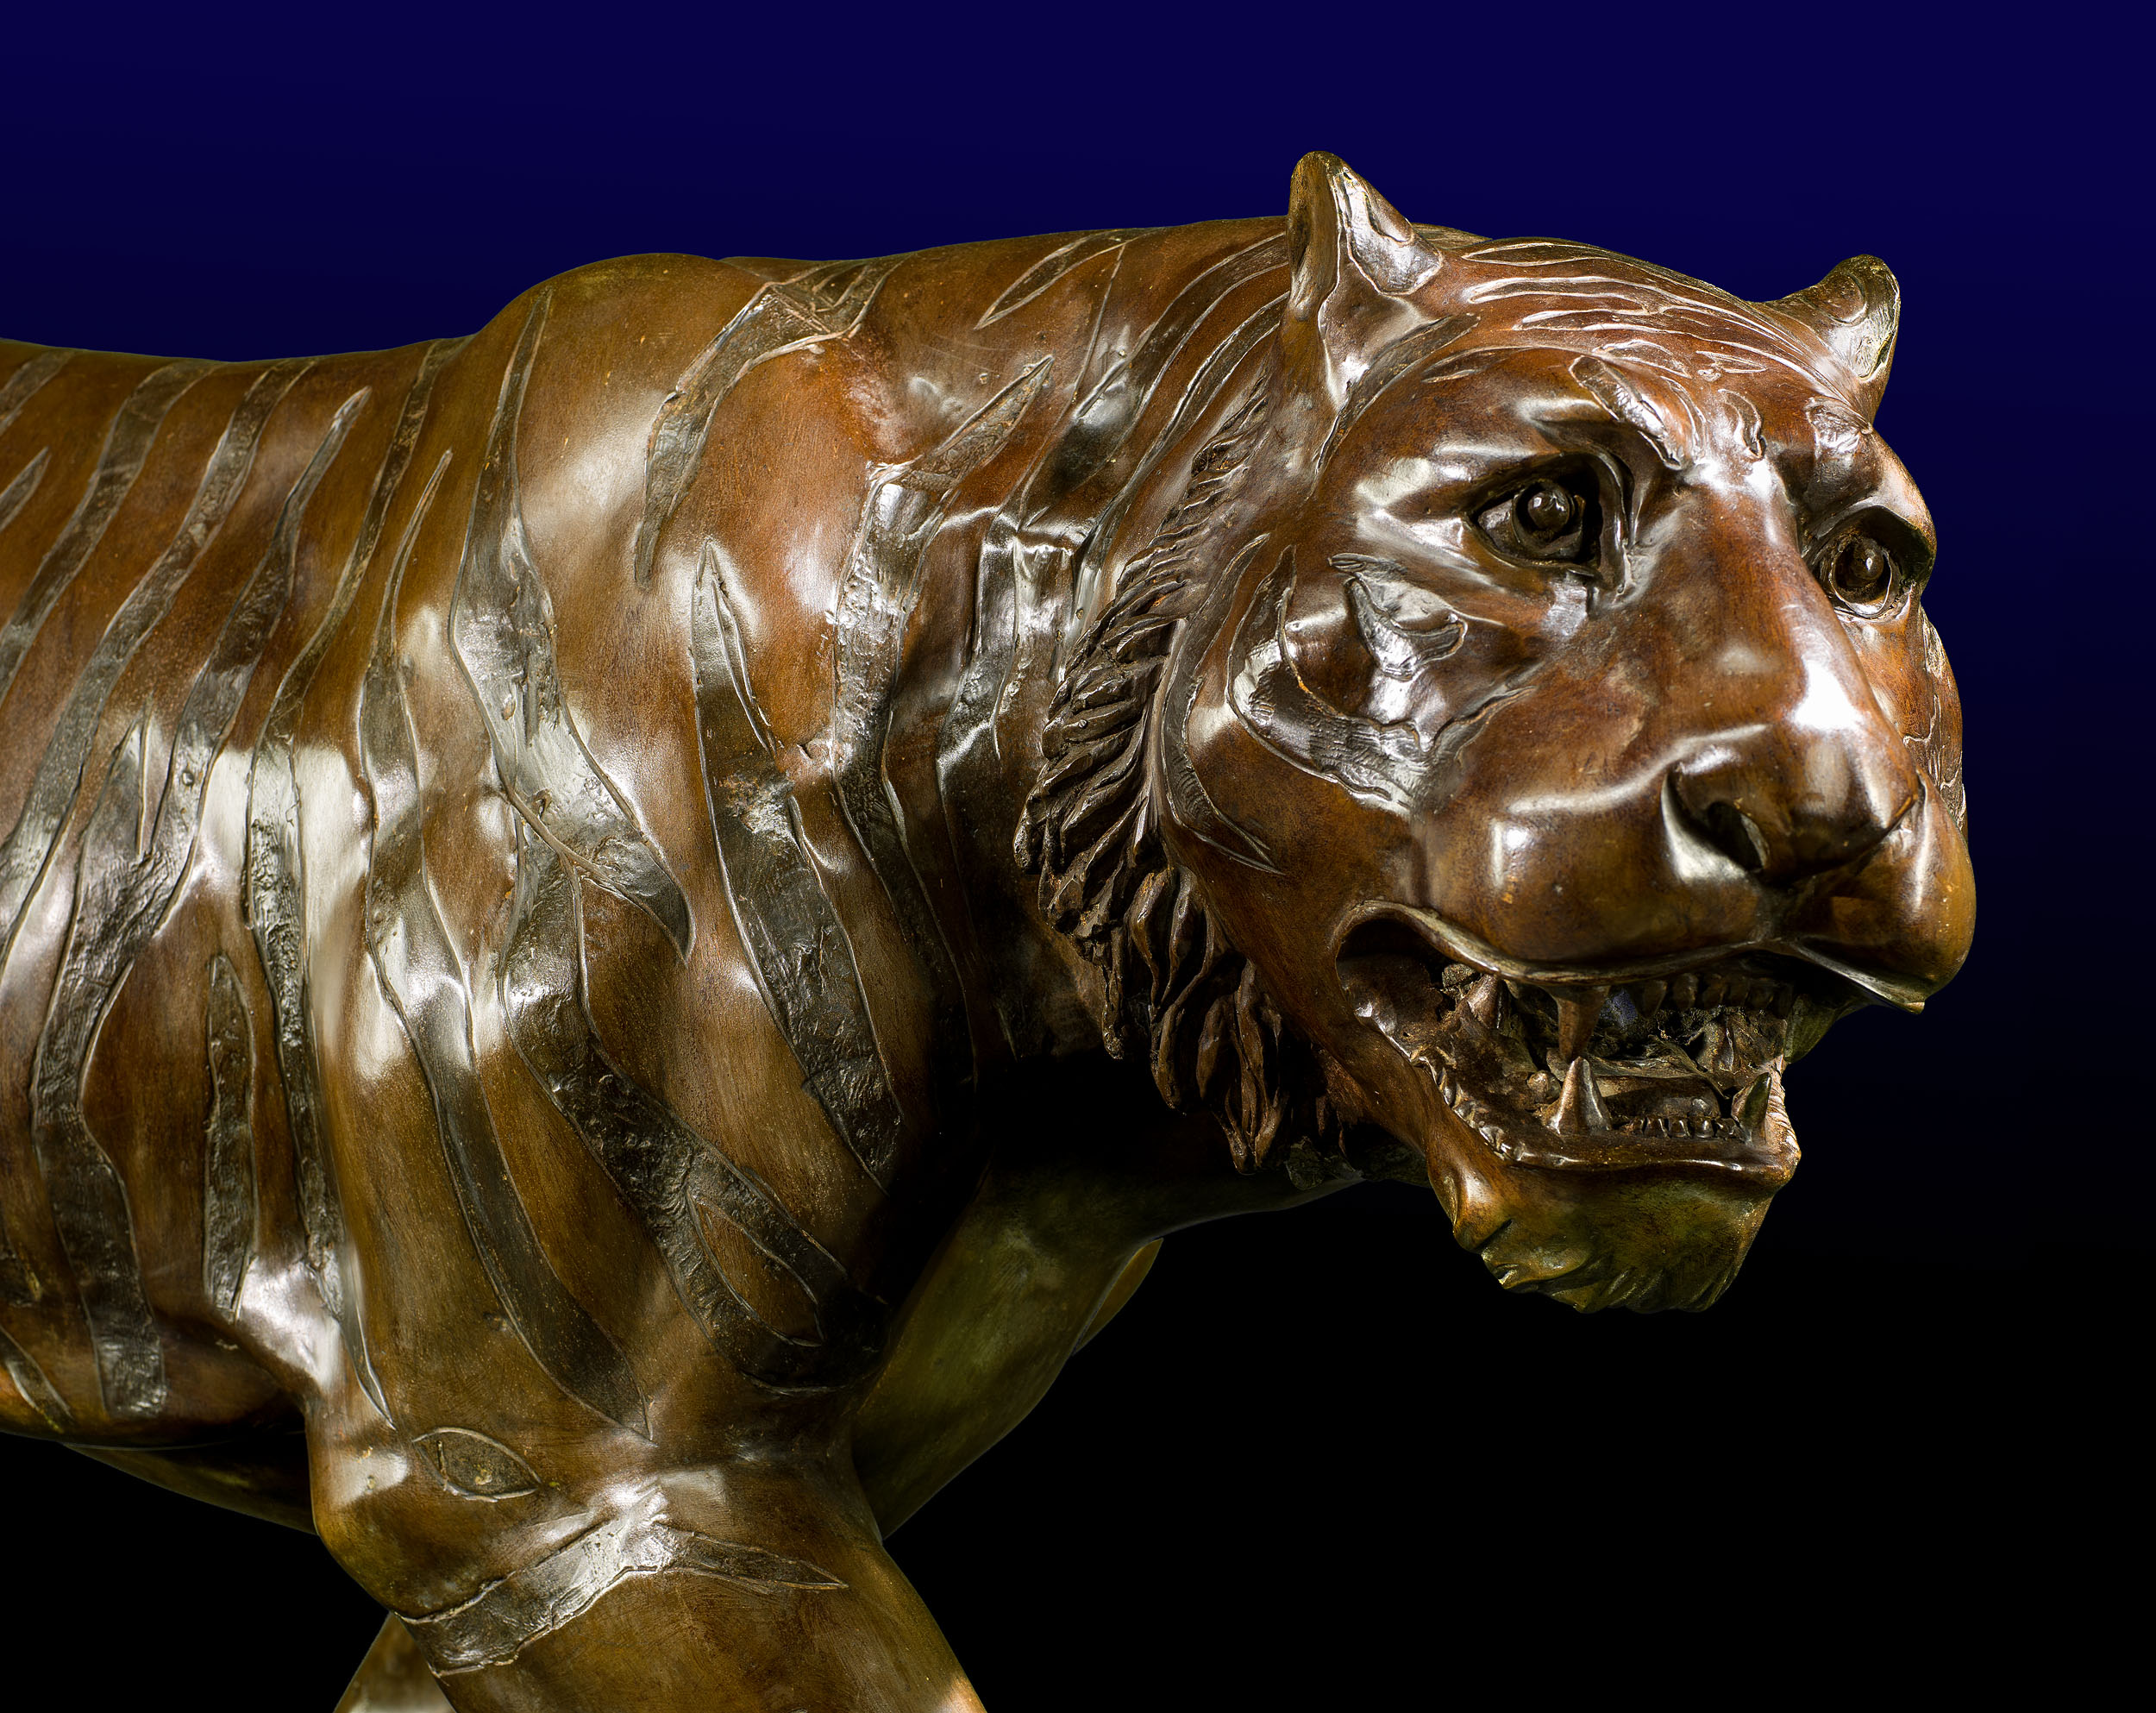 A Life Size Bronze Model of a Prowling Tiger